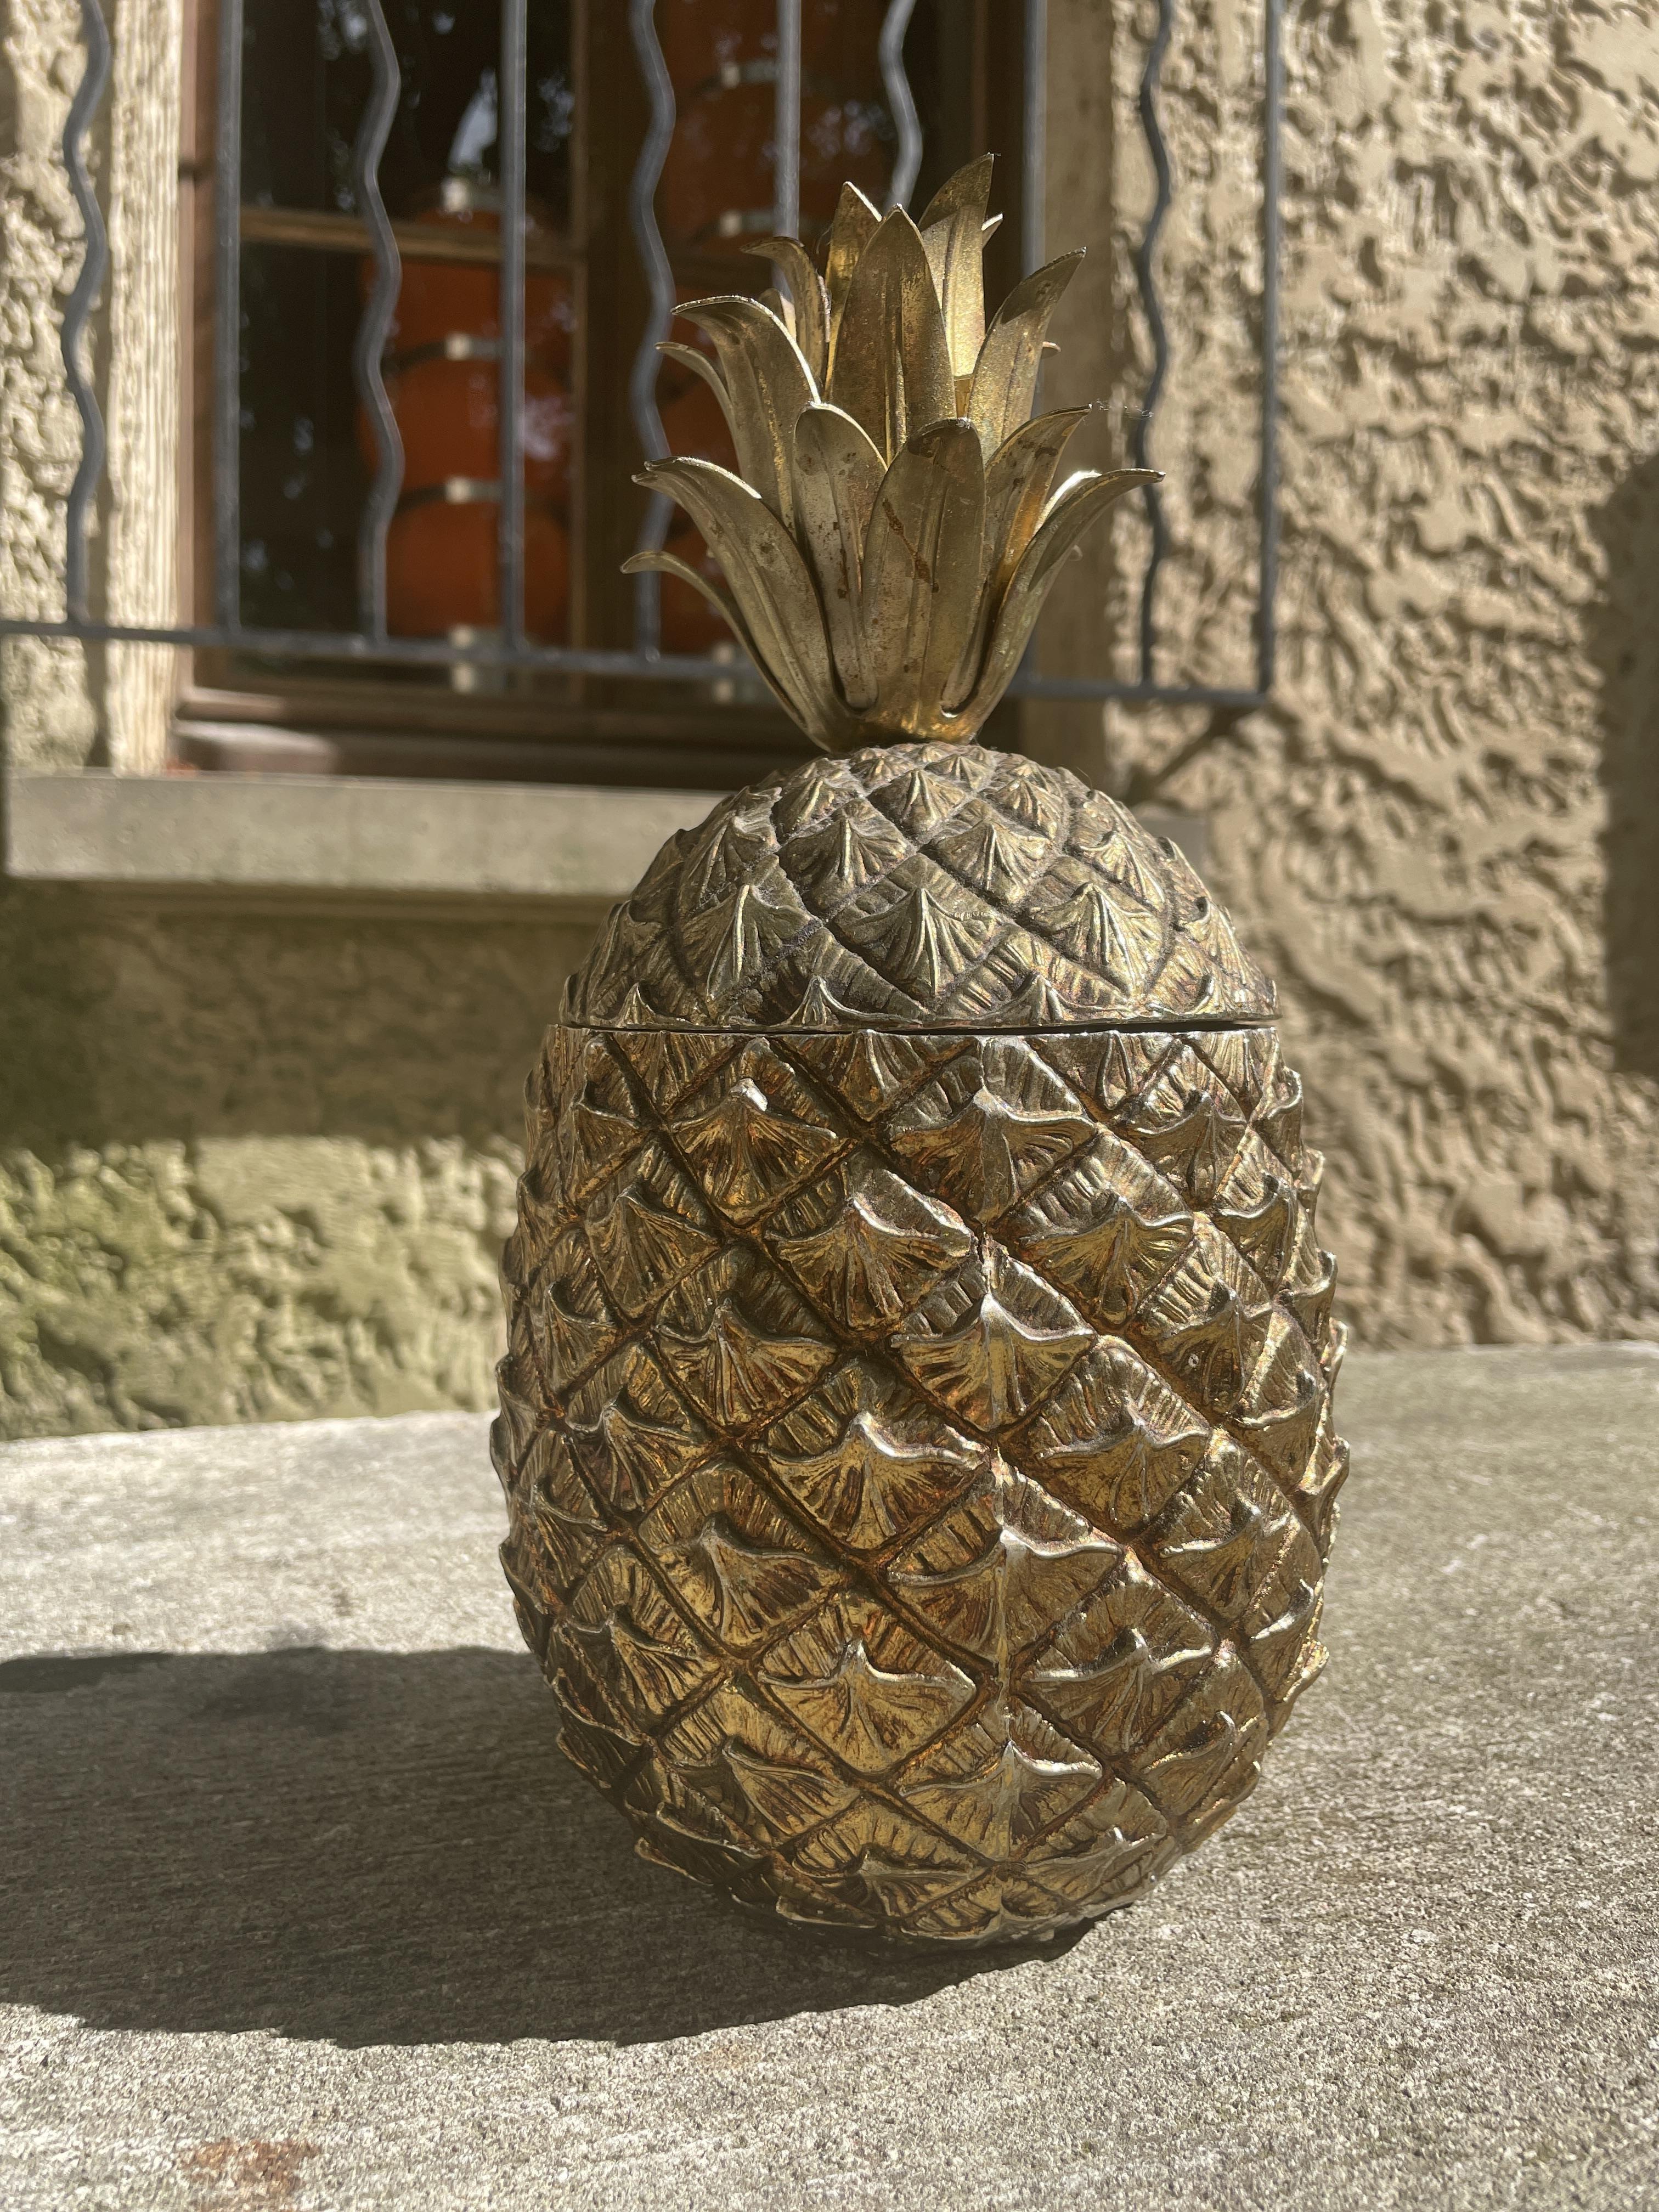 Pineapple ice bucket by Mauro Manetti for Fonderia D'Arte
Perfect condition.